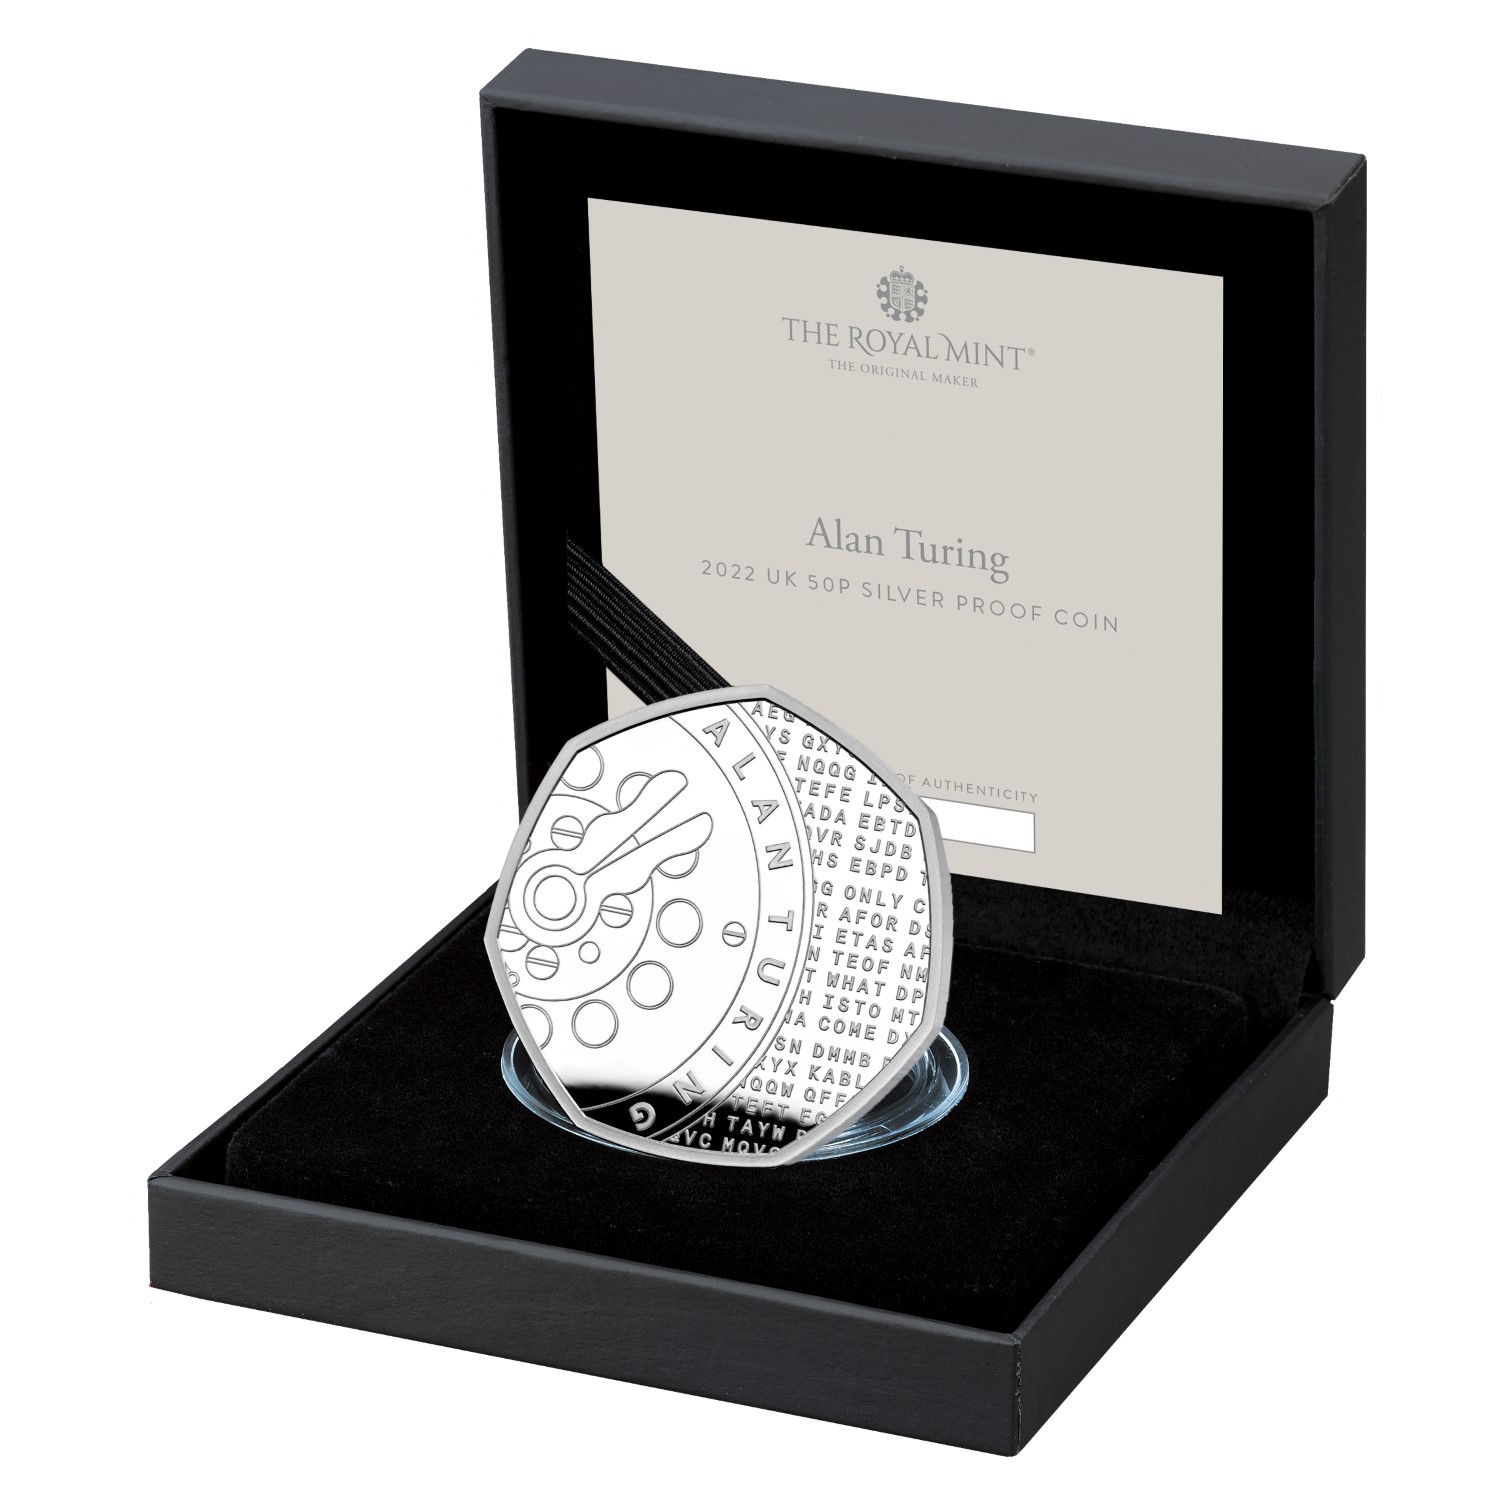 2022 Alan Turing 50p Silver Proof